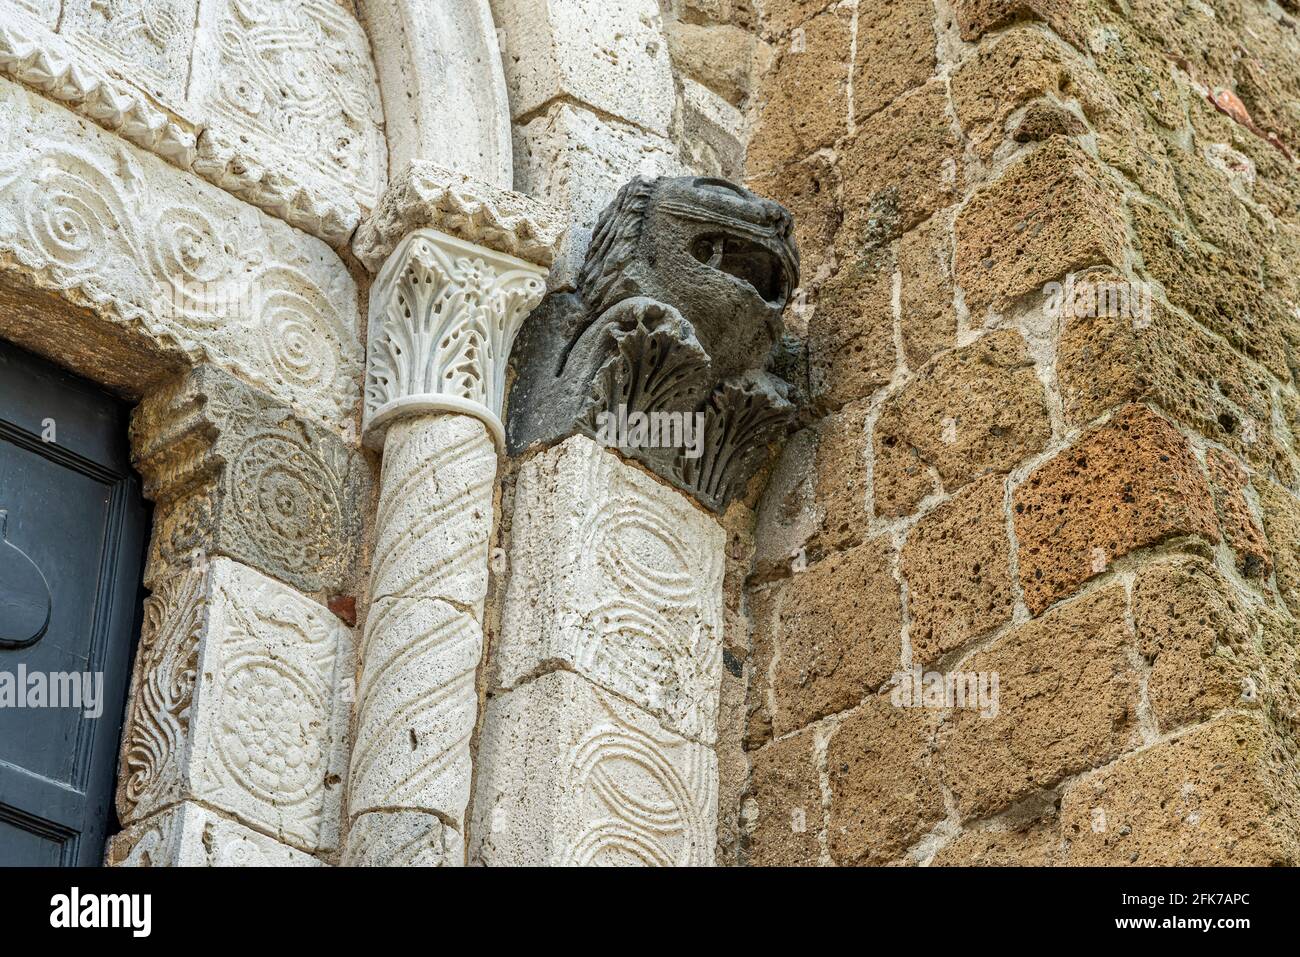 Detail of the lion-shaped capital, entrance portal of the cathedral of Saints Peter and Paul in Sovana. Sovana, Grosseto province, Tuscany, Italy Stock Photo